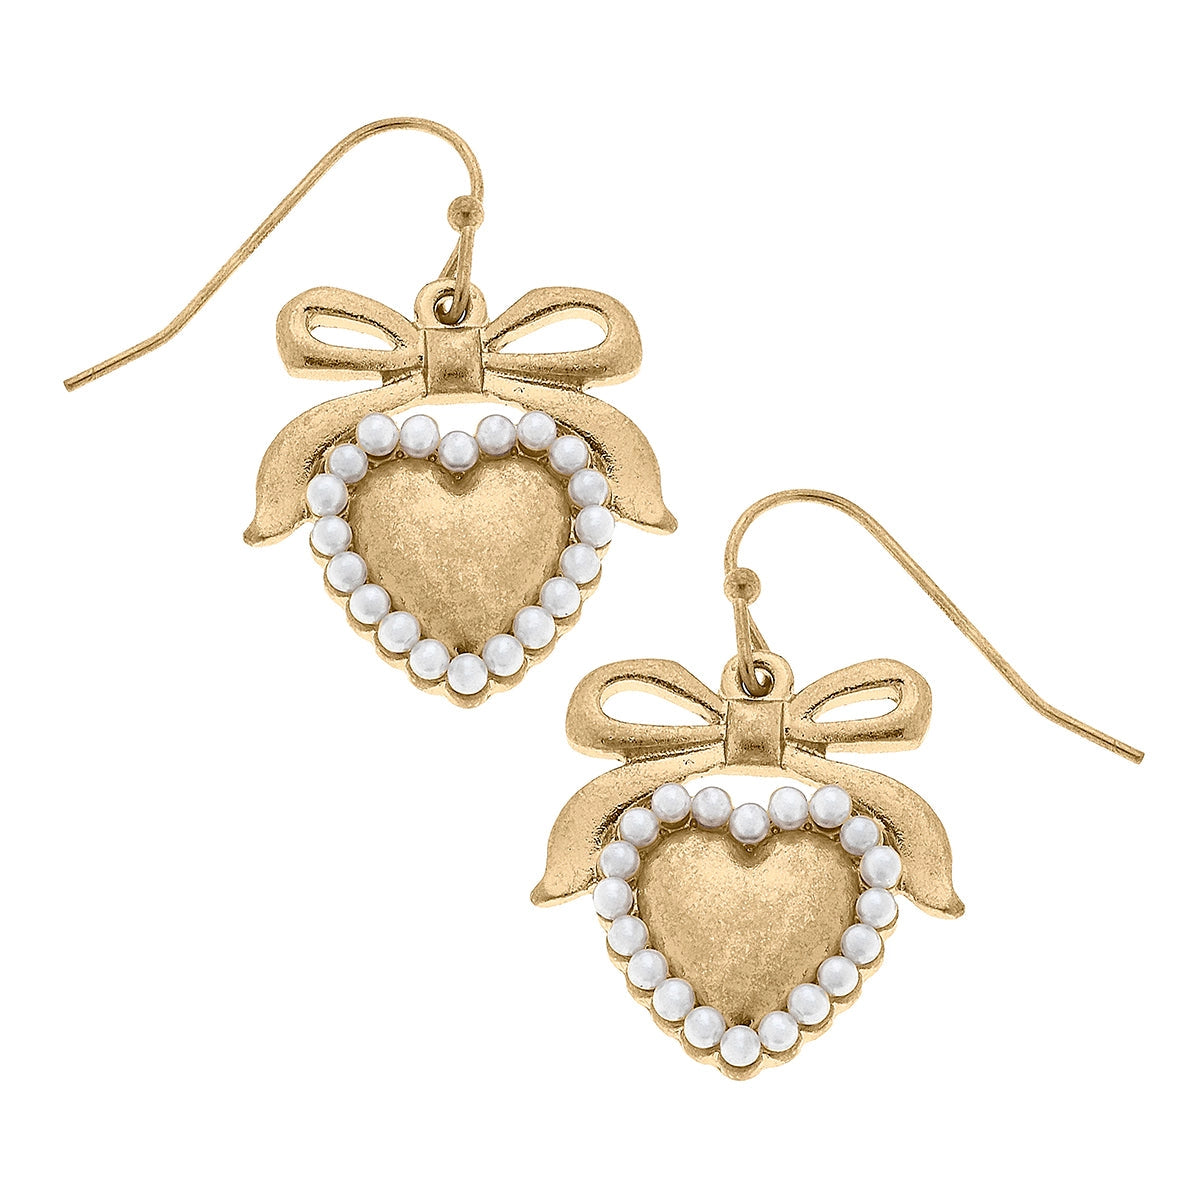 Molly Pearl Studded Heart & Bow Earrings in Worn Gold